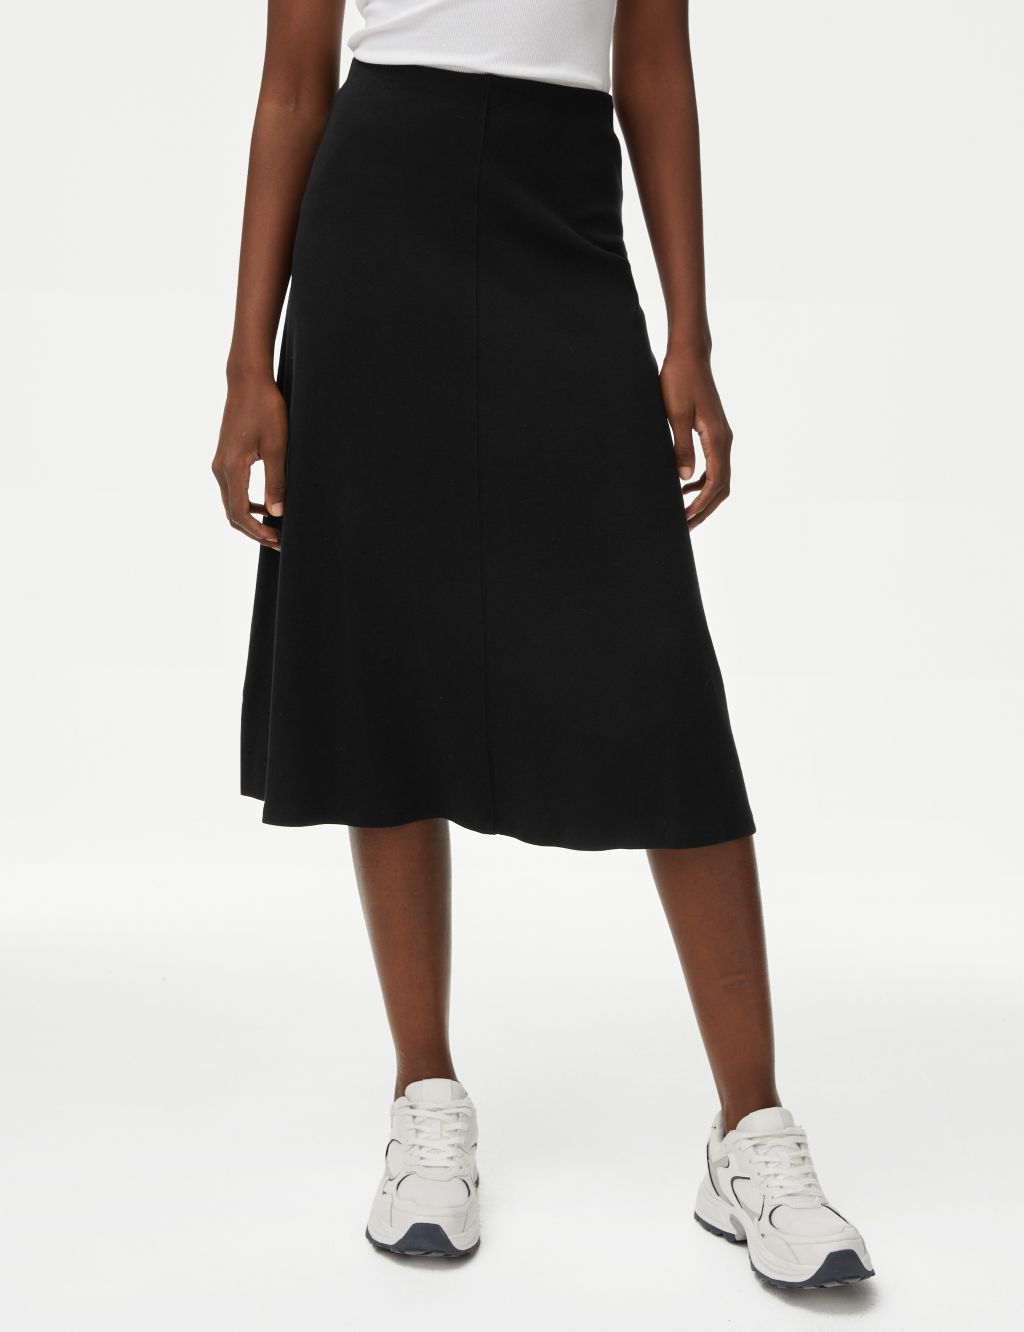 Cotton Rich Ribbed Midi A-Line Skirt image 4